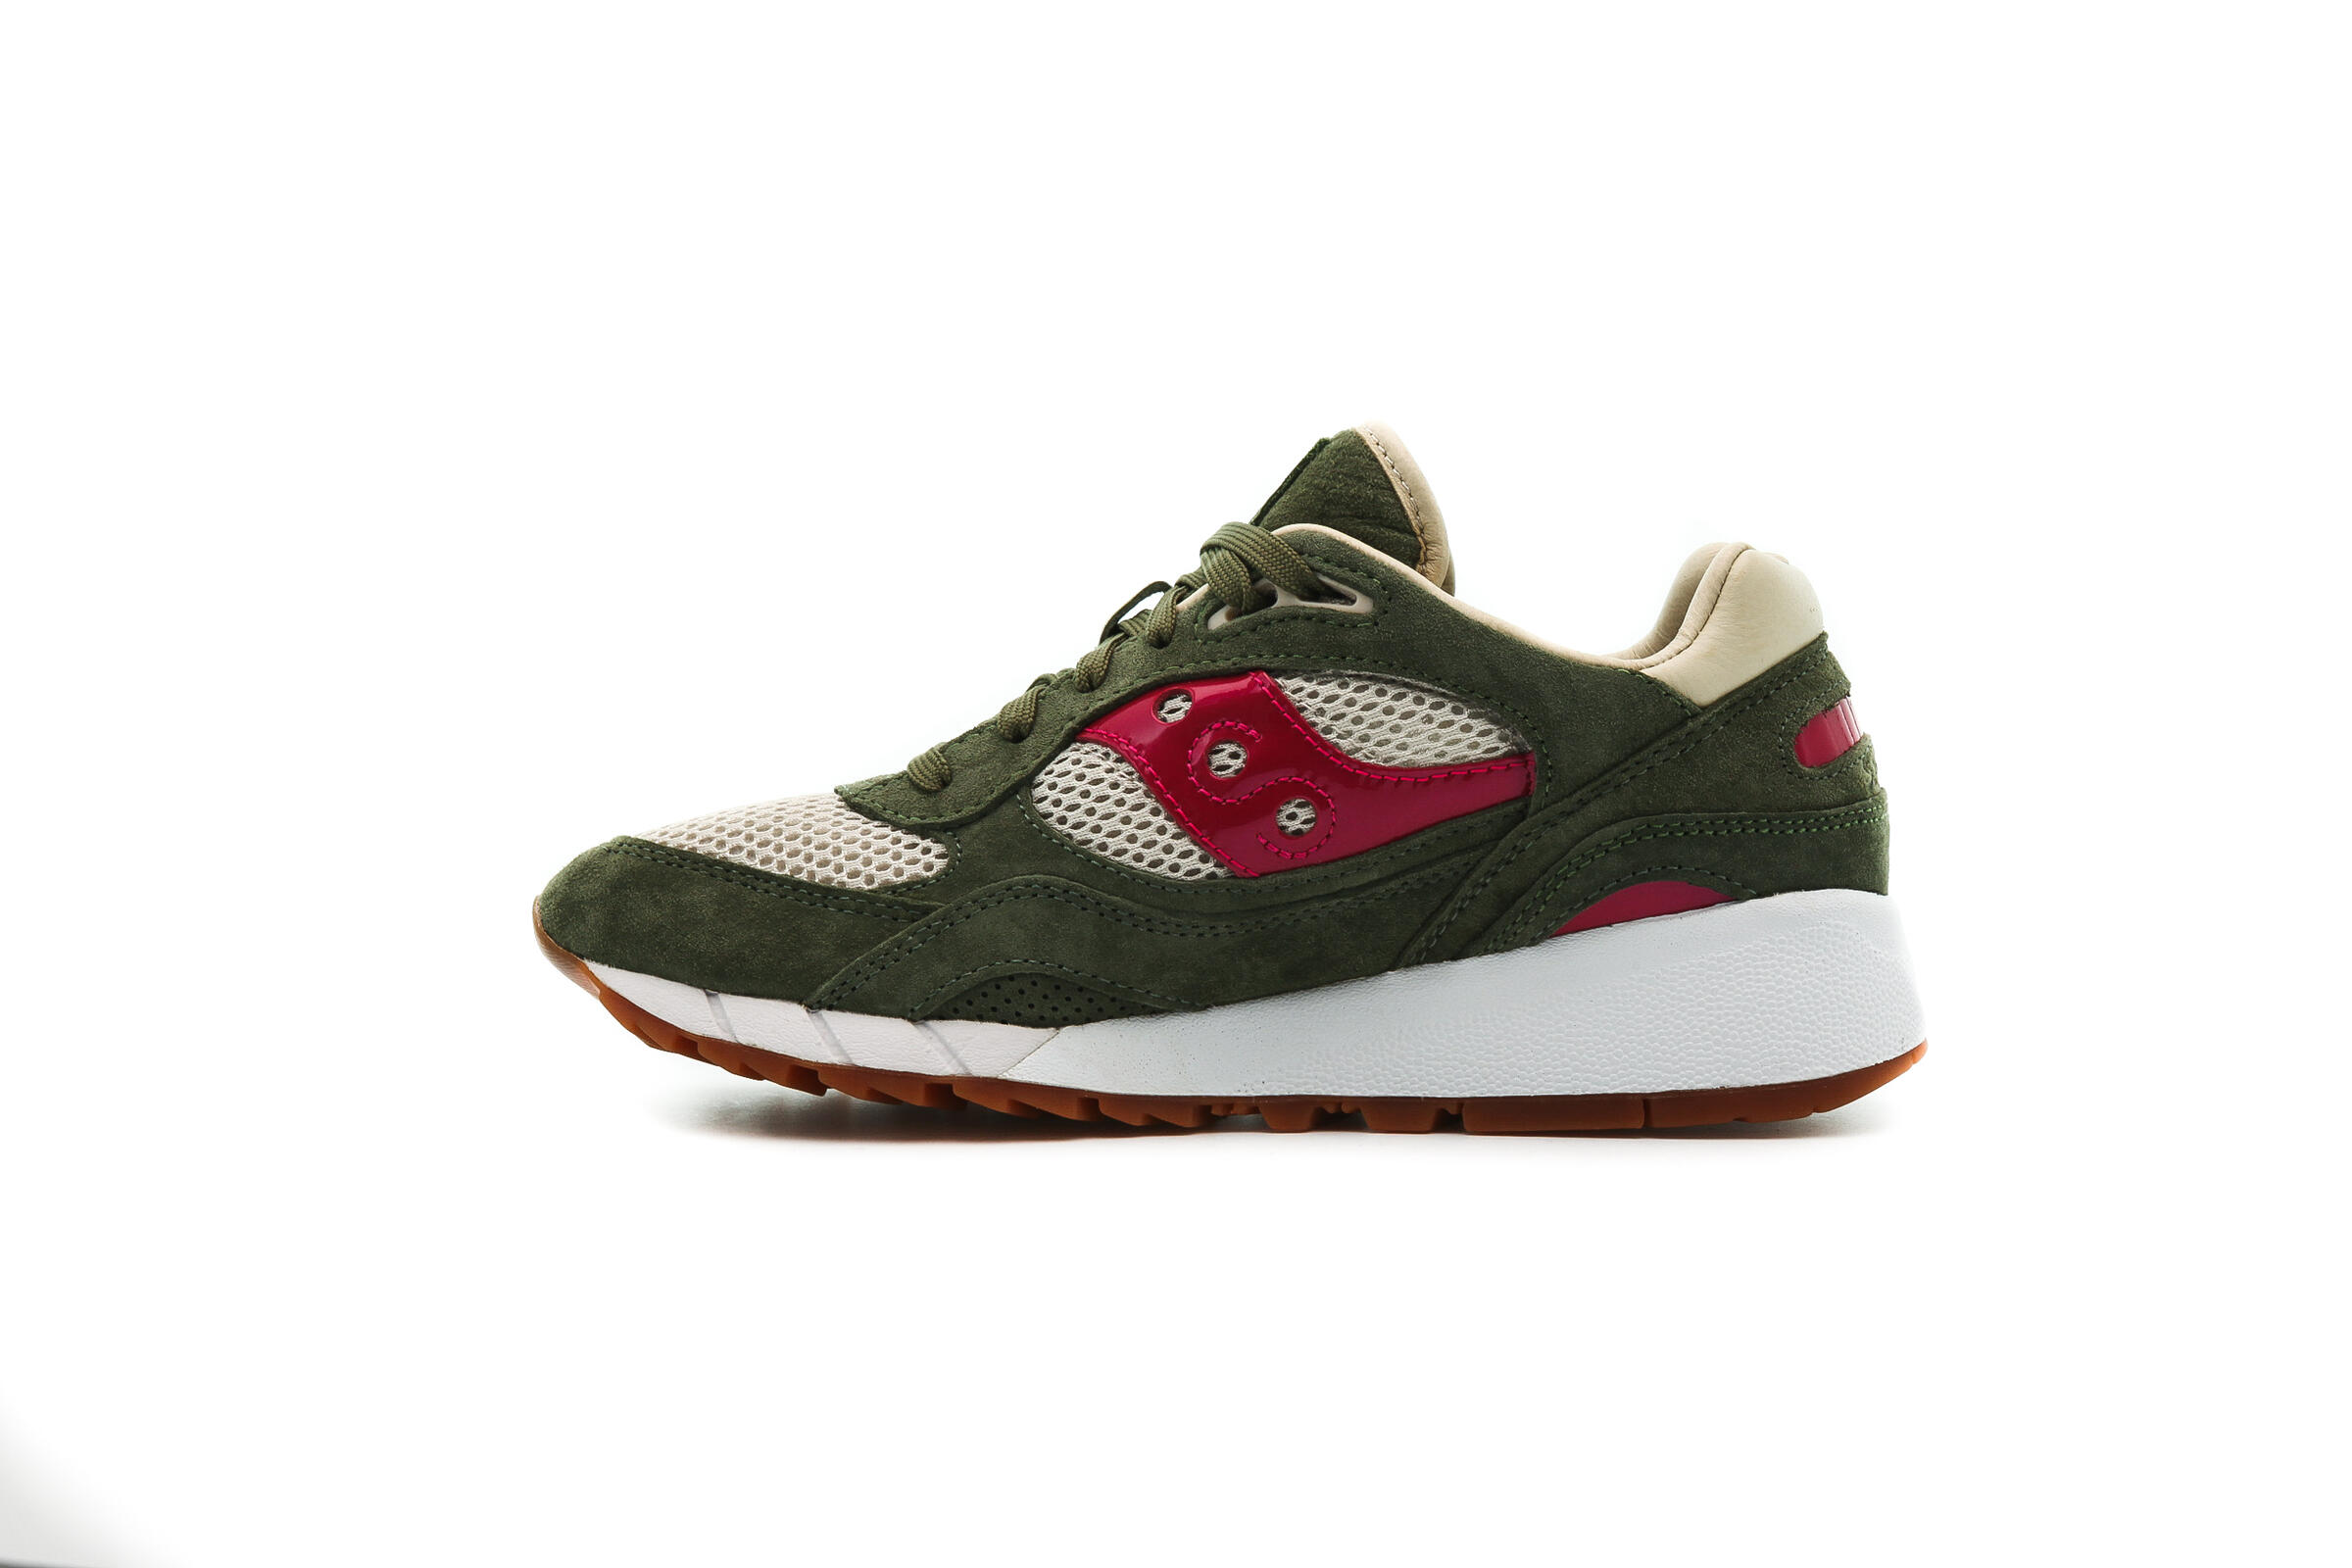 SAUCONY x UP THERE SHADOW 6000 "DOORS TO THE WORLD"